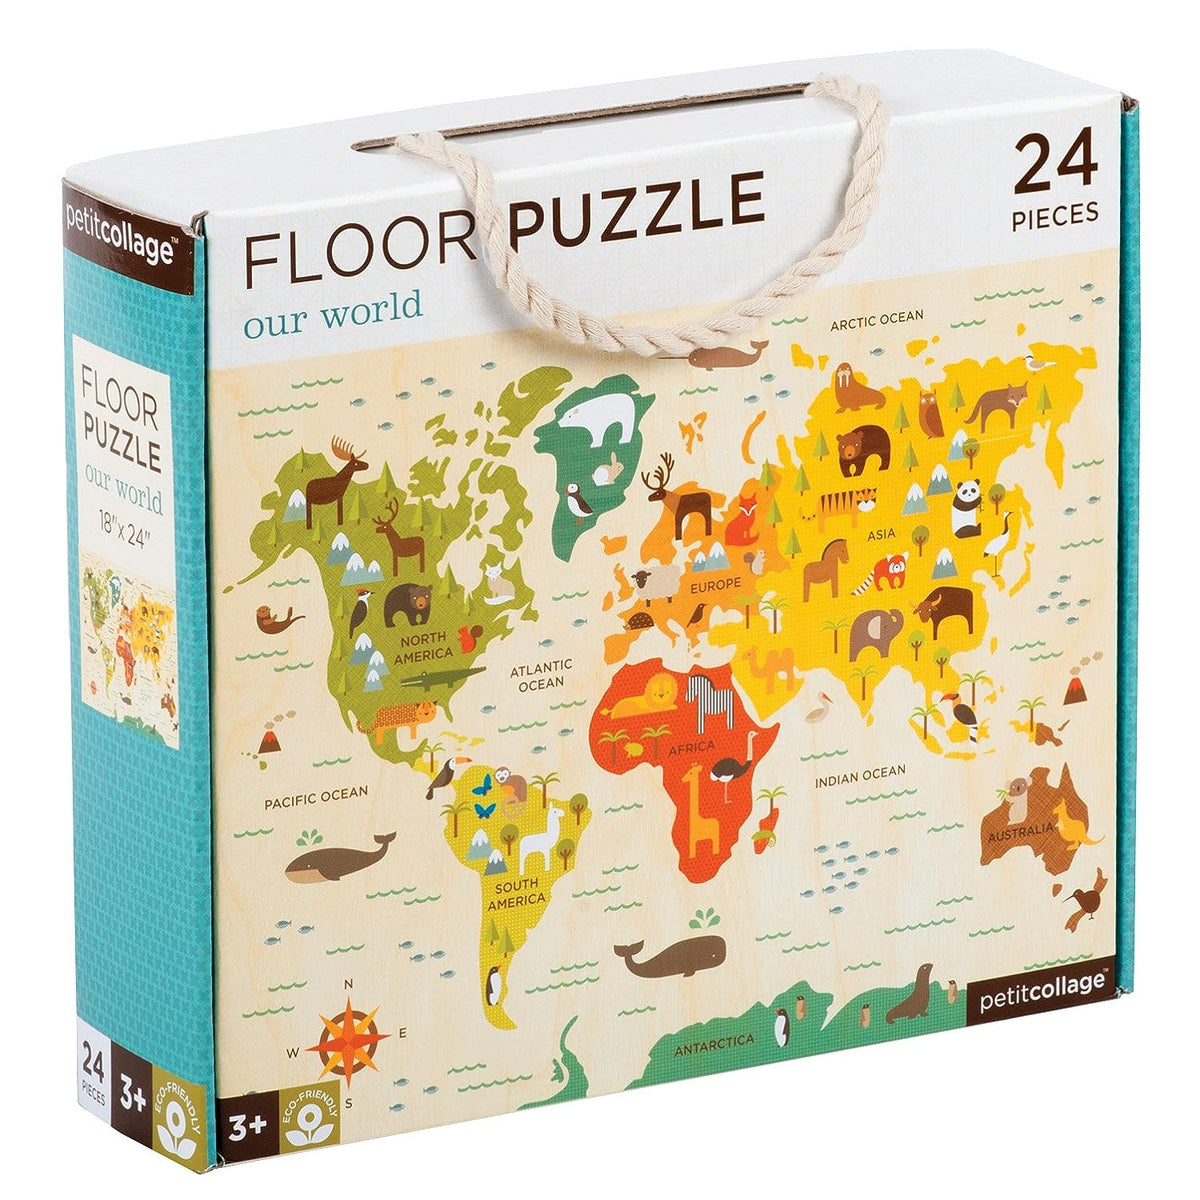 Our World 24 pc Floor Puzzle